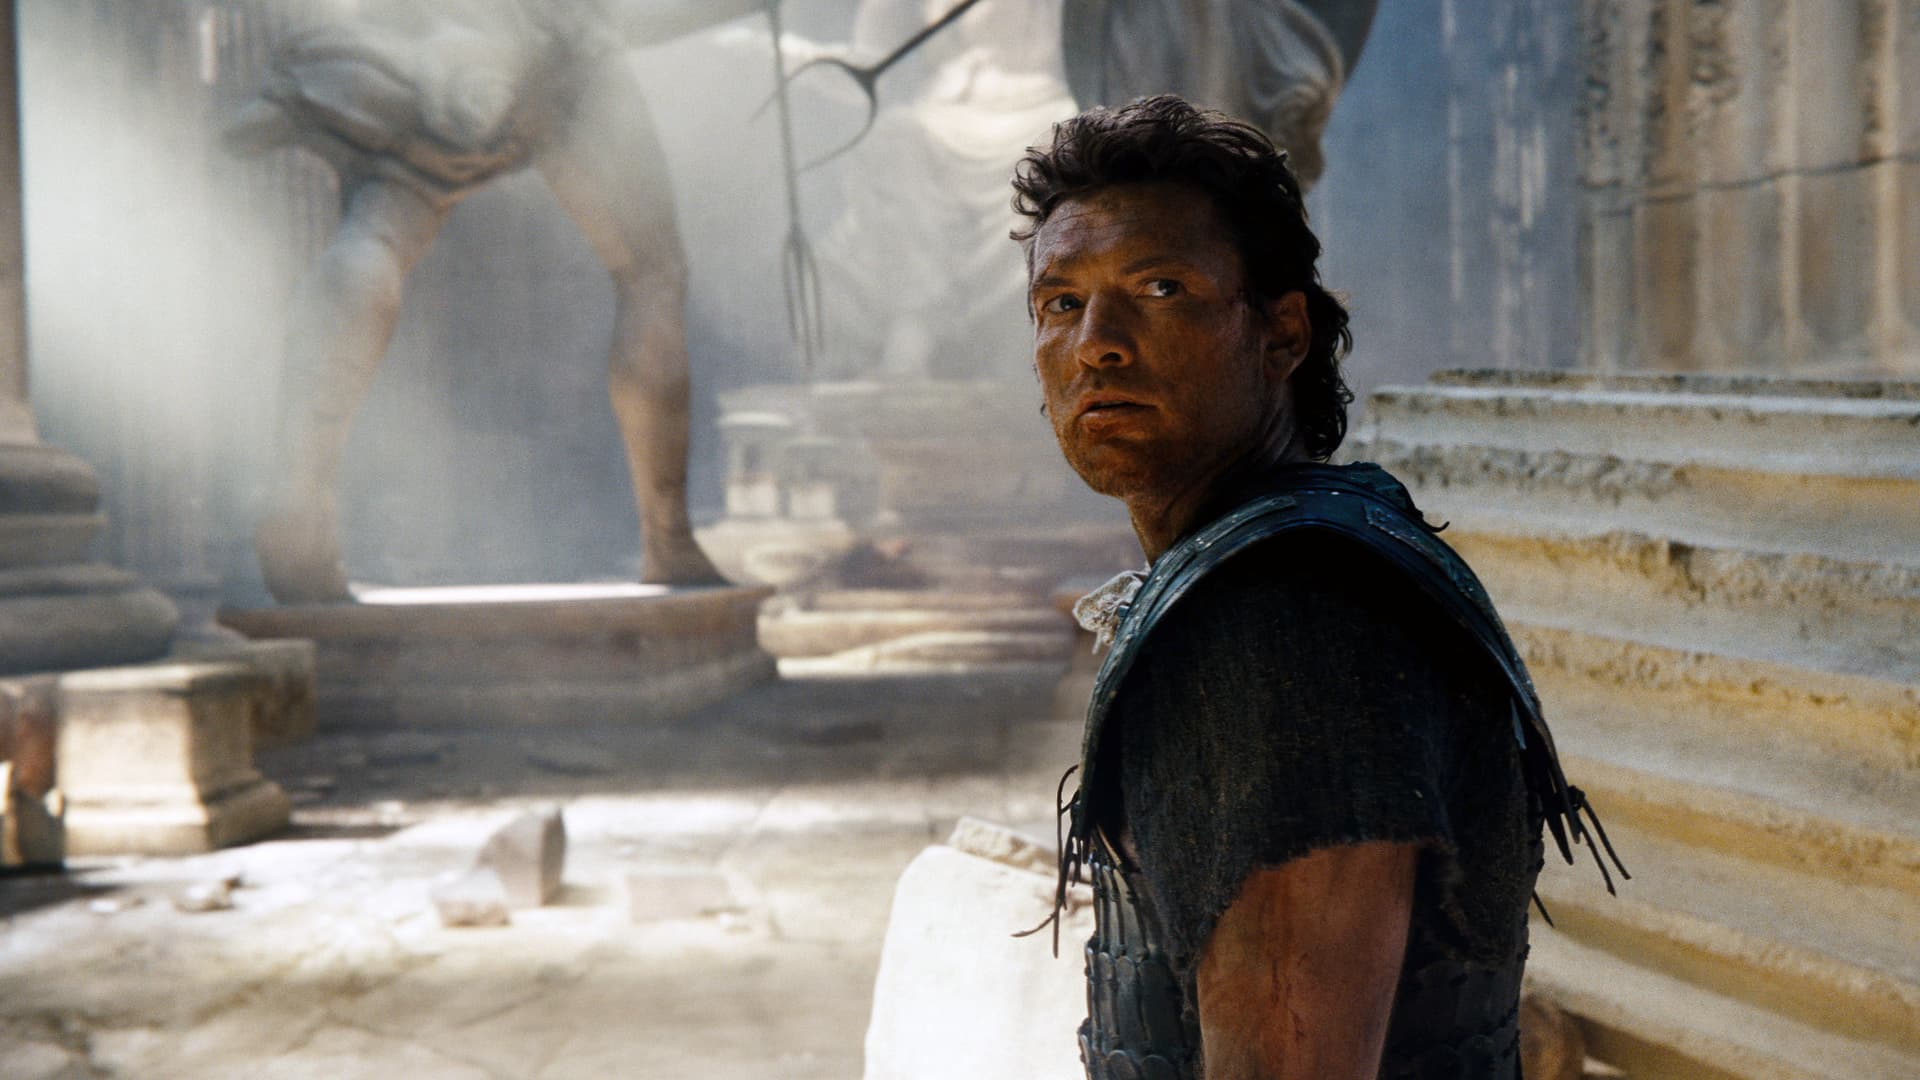 Wrath of the Titans (2012): Where to Watch and Stream Online